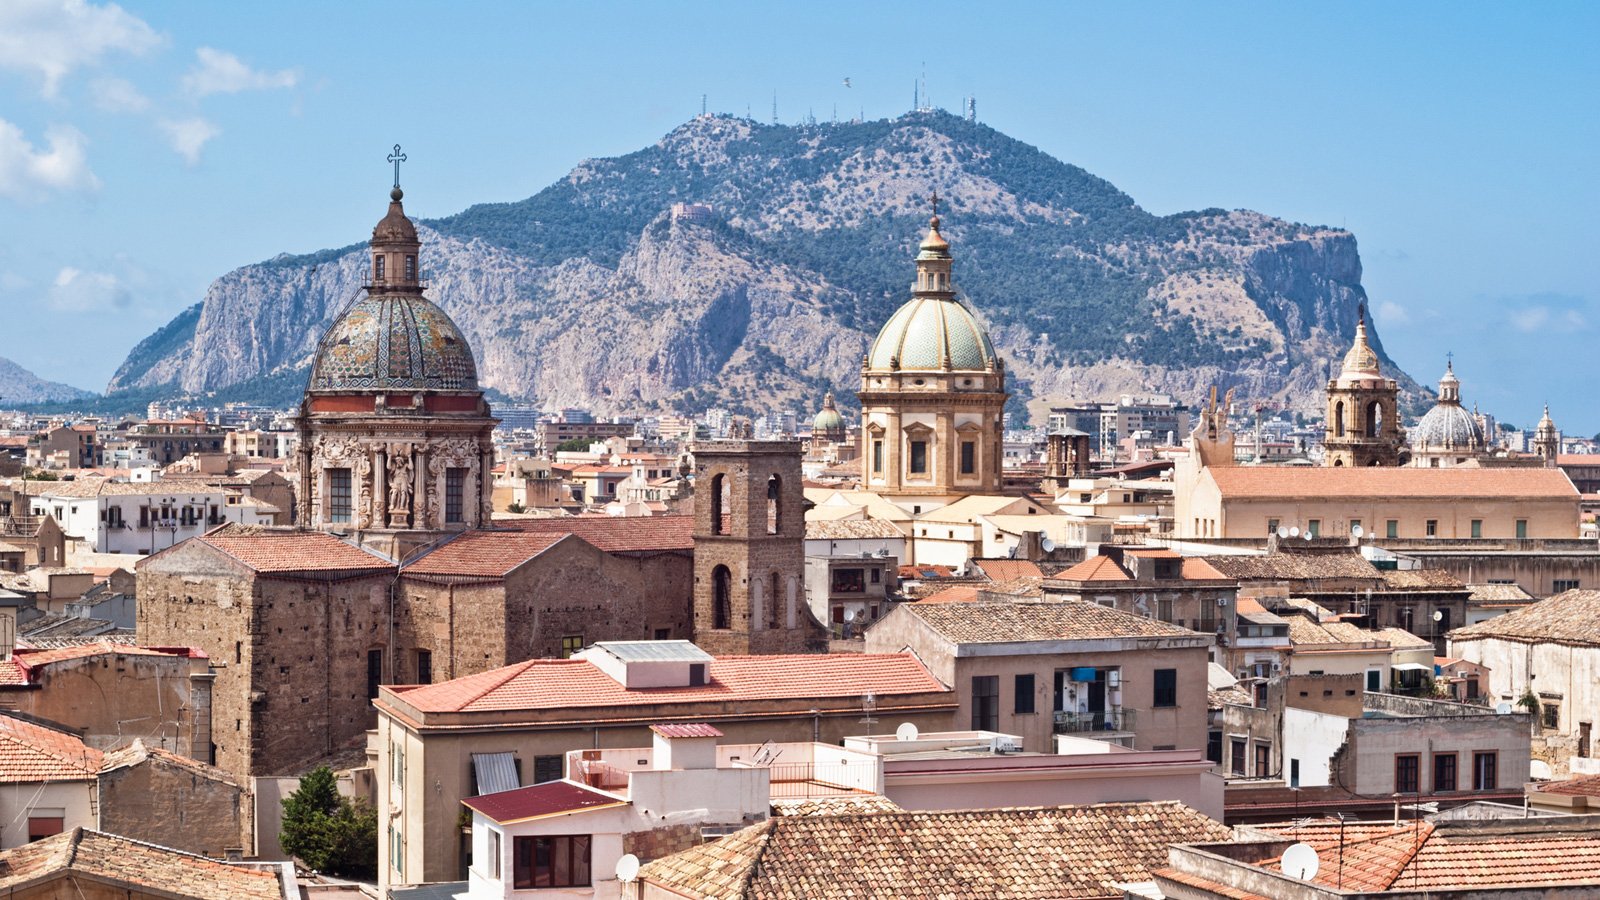 Italian city of Palermo shuts down all systems to fend off cyberattack